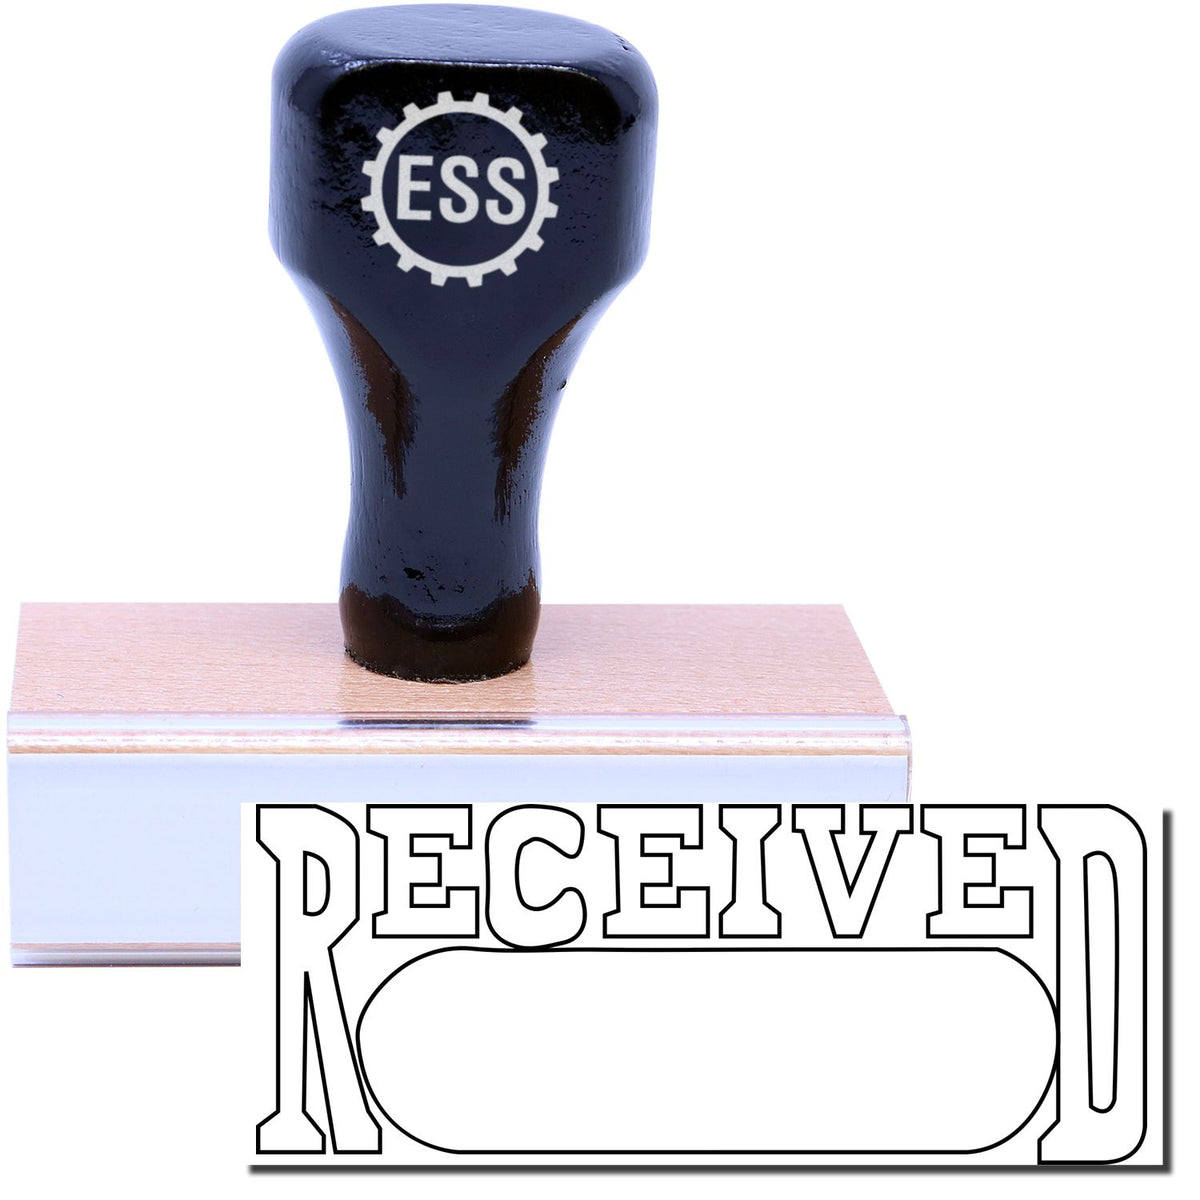 A stock office rubber stamp with a stamped image showing how the text &quot;RECEIVED&quot; in a large outline font with a date box is displayed after stamping.